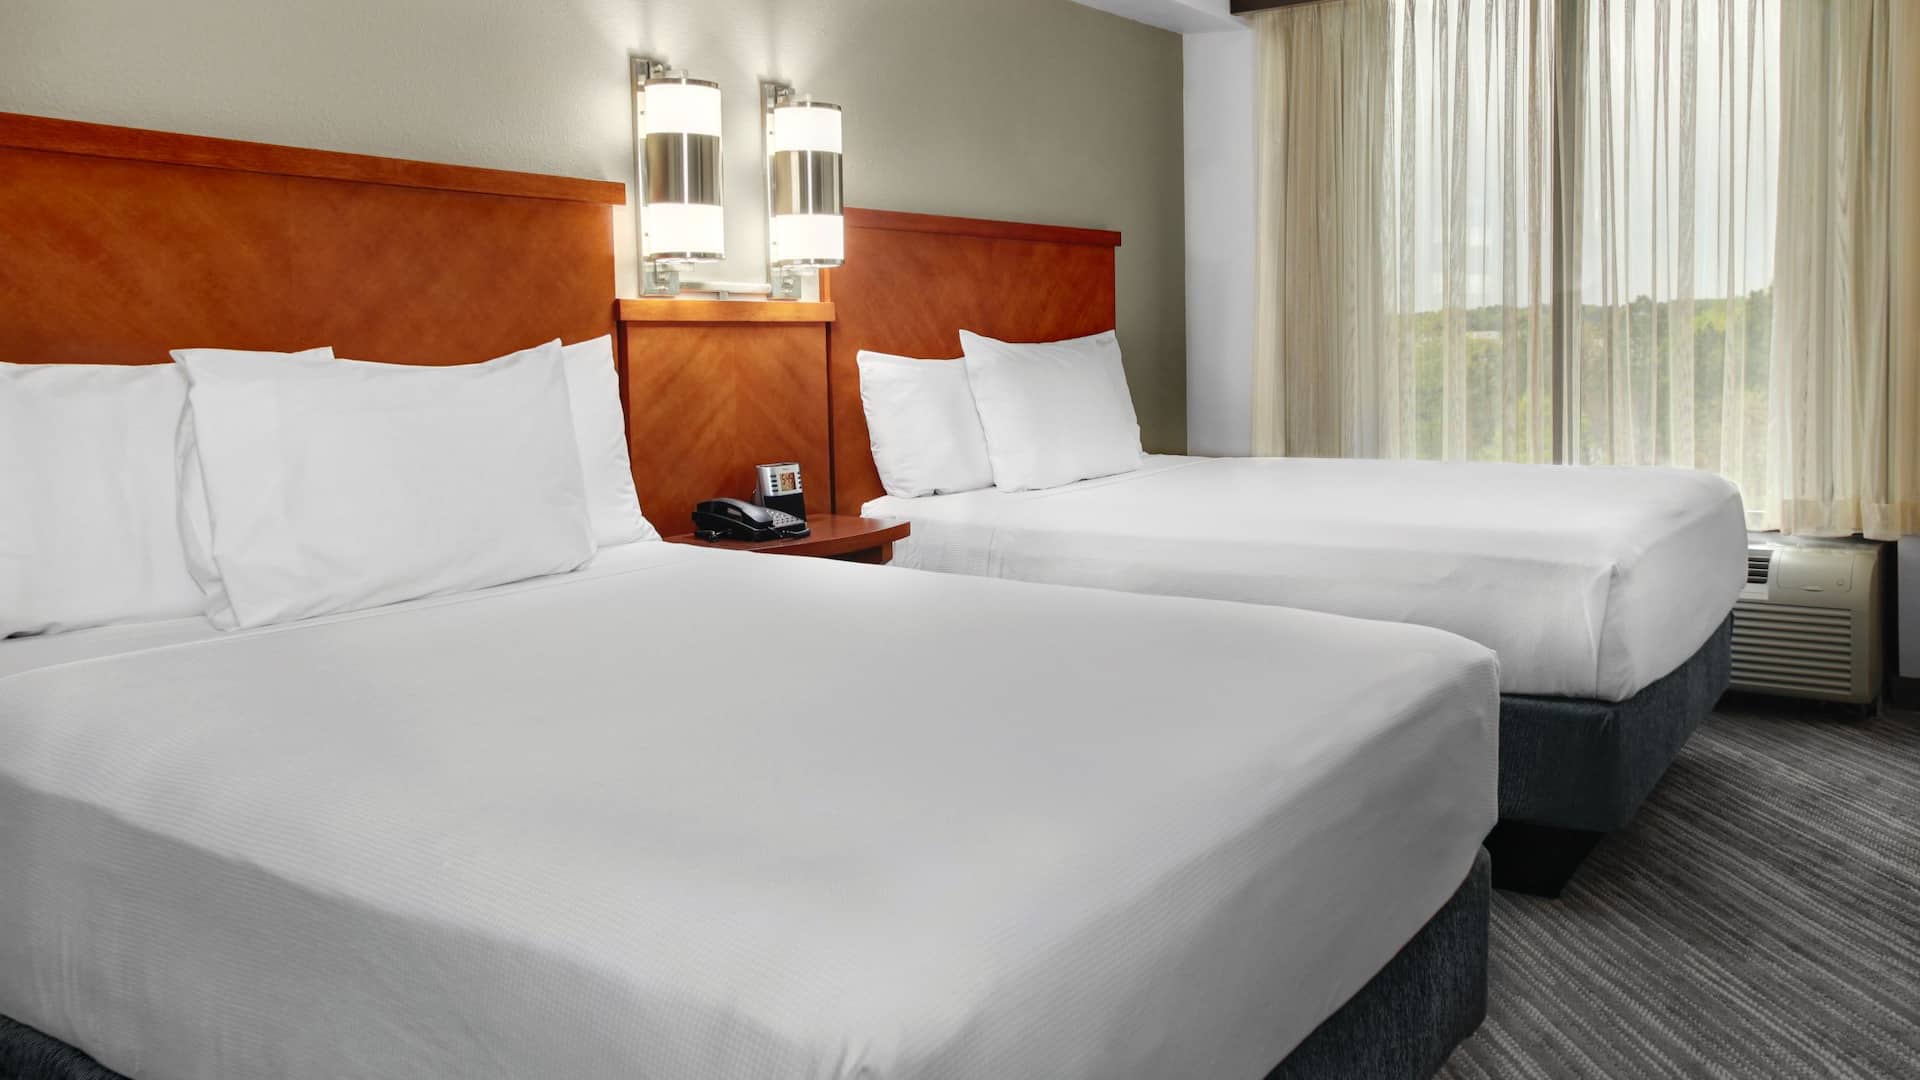 Guestroom with double queen size beds at Hyatt Place Cleveland Independence